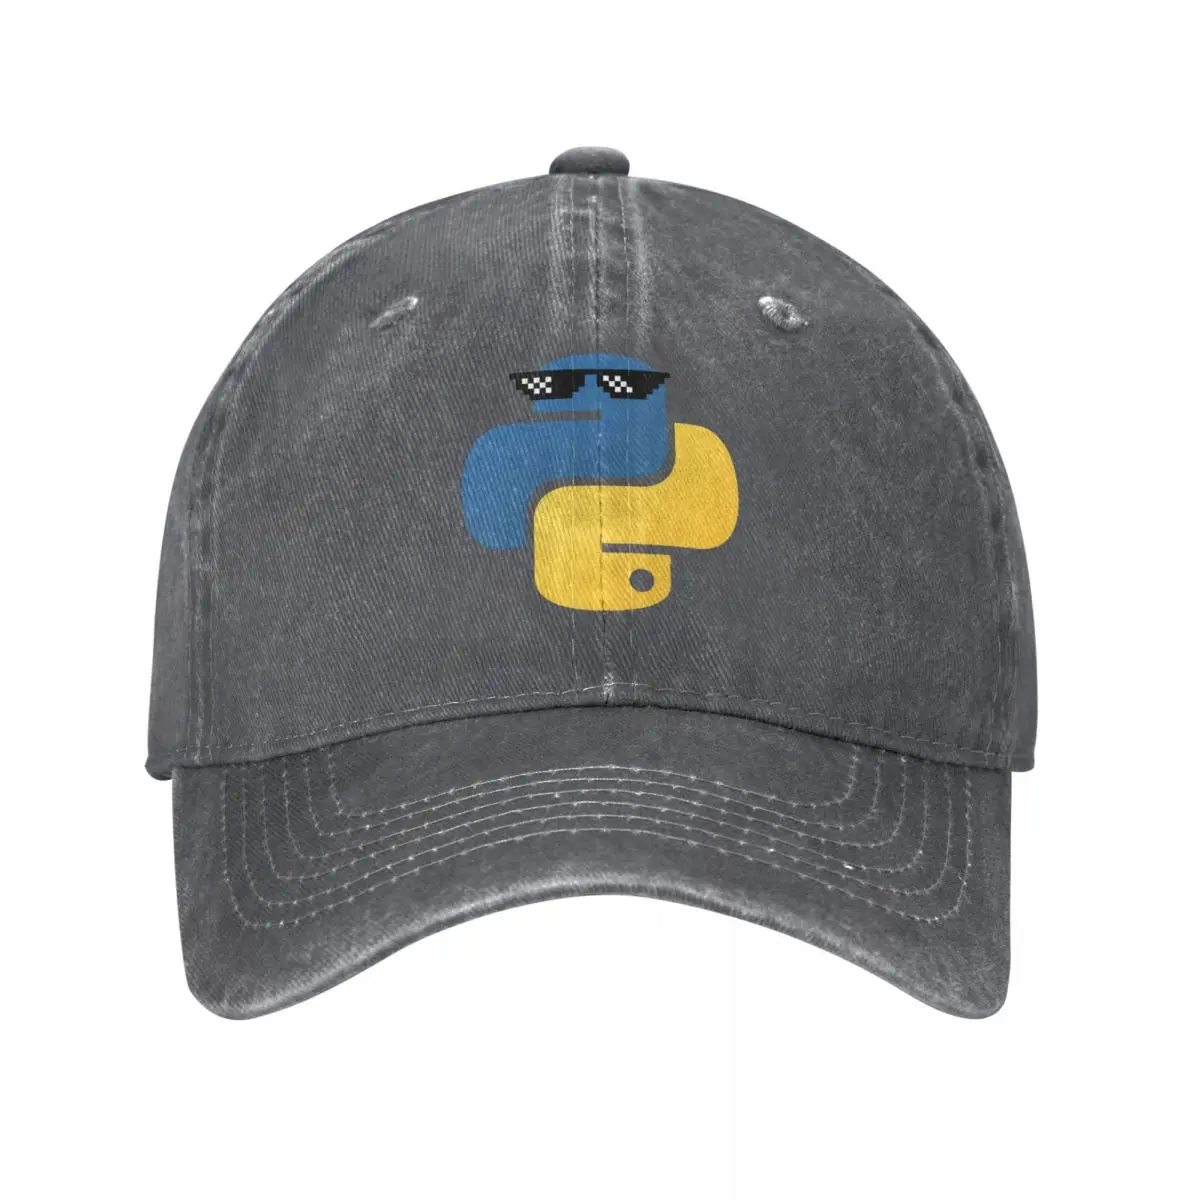 

Python Gangster Programmer Linux Code Funny High Quality Distressed Washed Caps Fashion Unisex Headwear